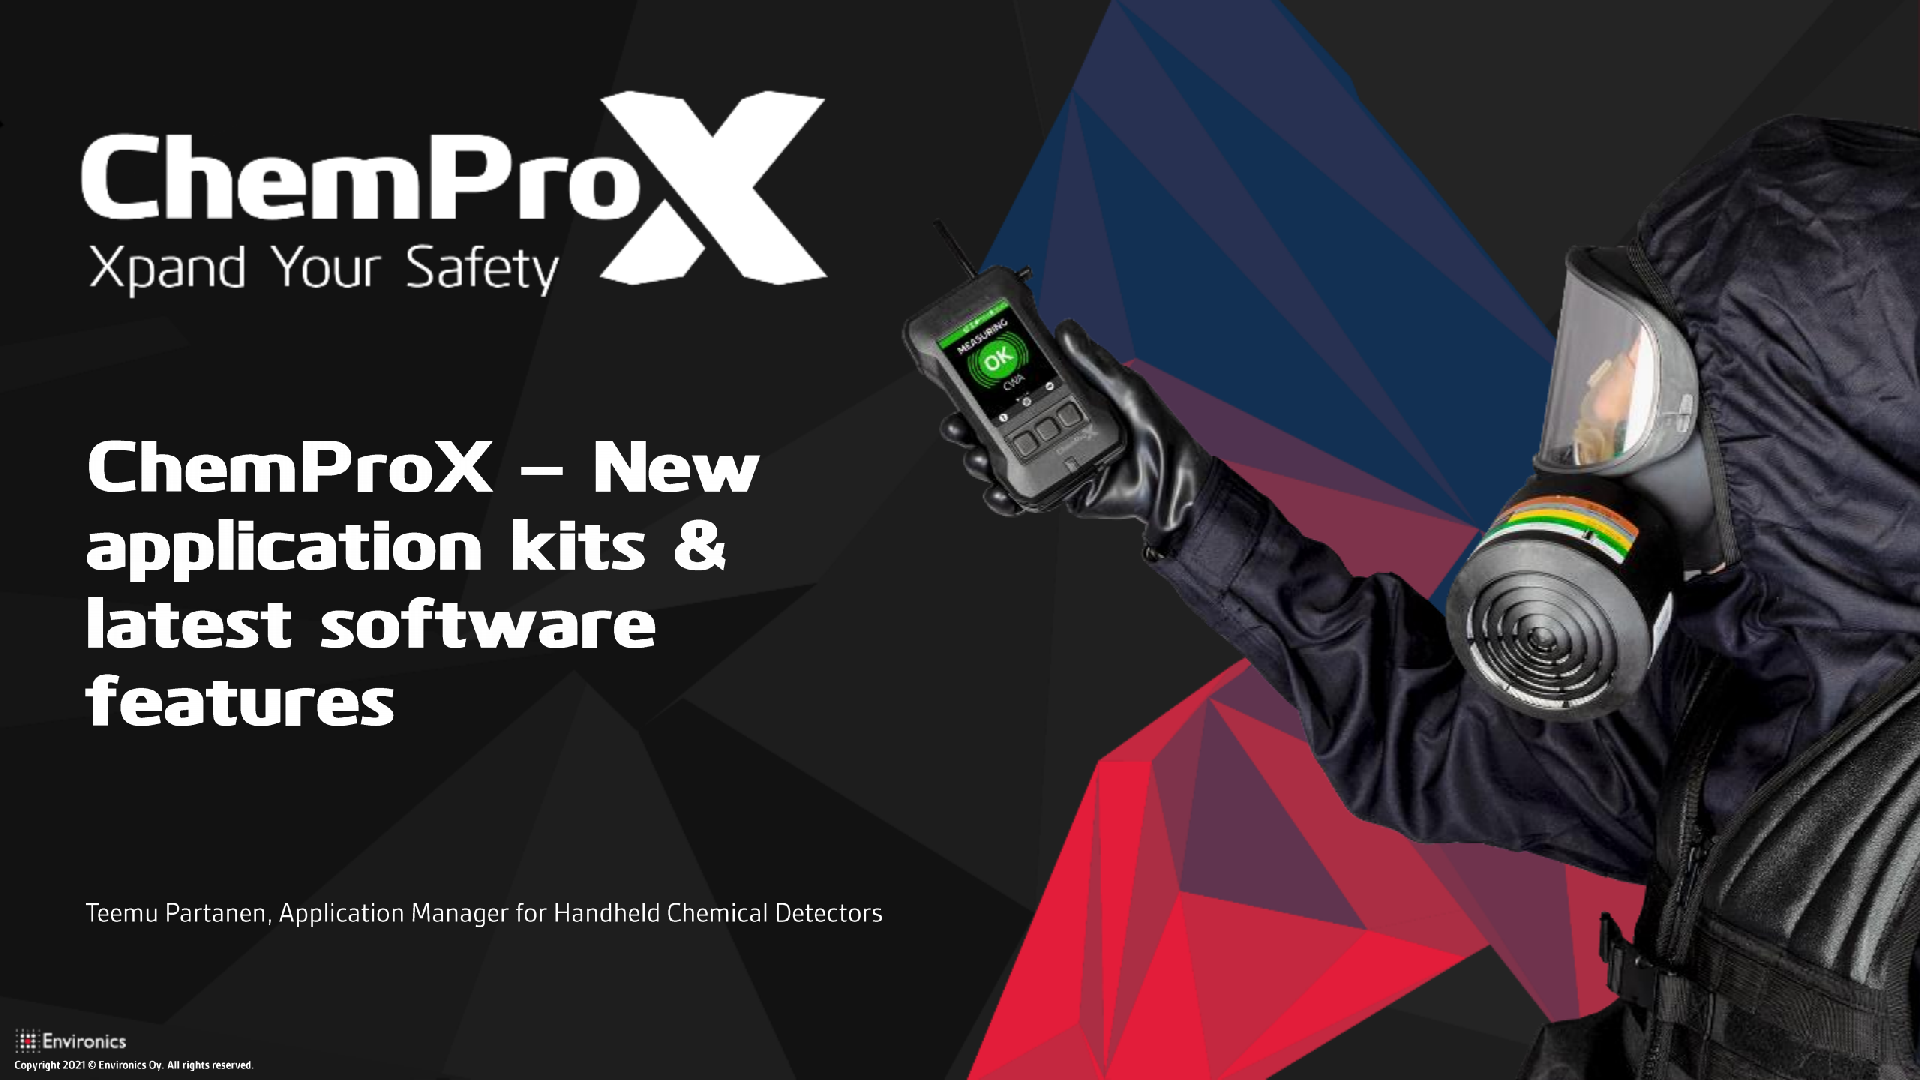 ChemProX CBRN kit & Deployment kit & new software features-100123_01